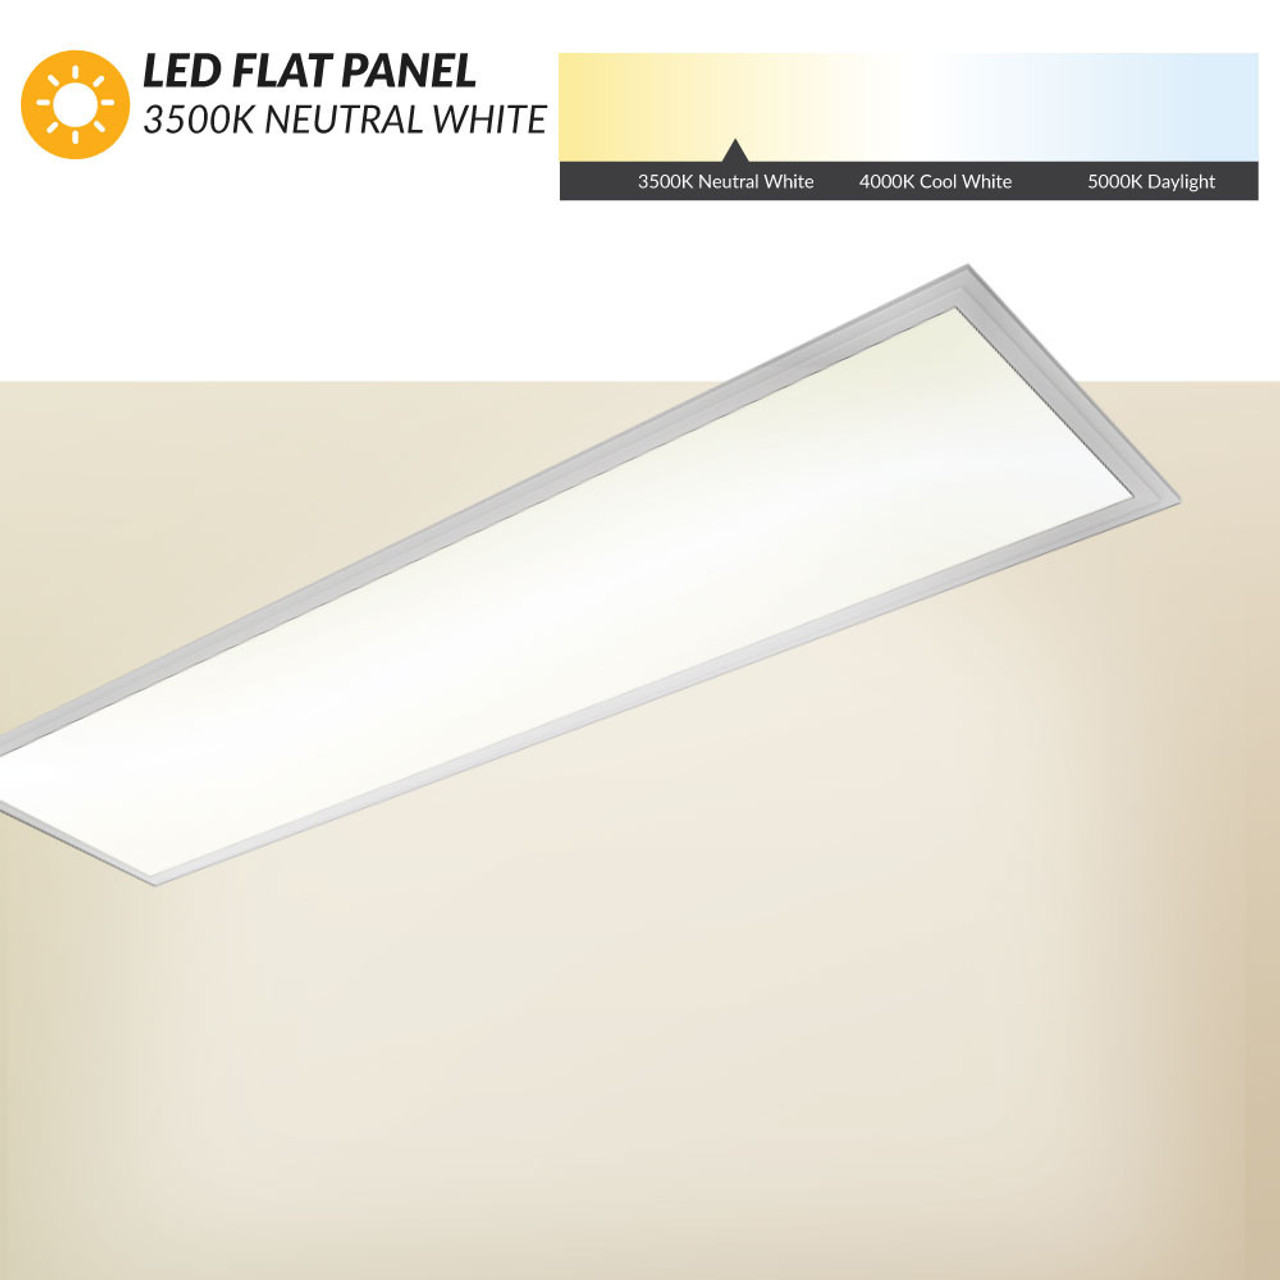 Ved lov Gymnast træ Recessed LED Panel Light 1x4 - 3500K Neutral White - Dimmable - With Extra  Recessed Sheet Rock Kit